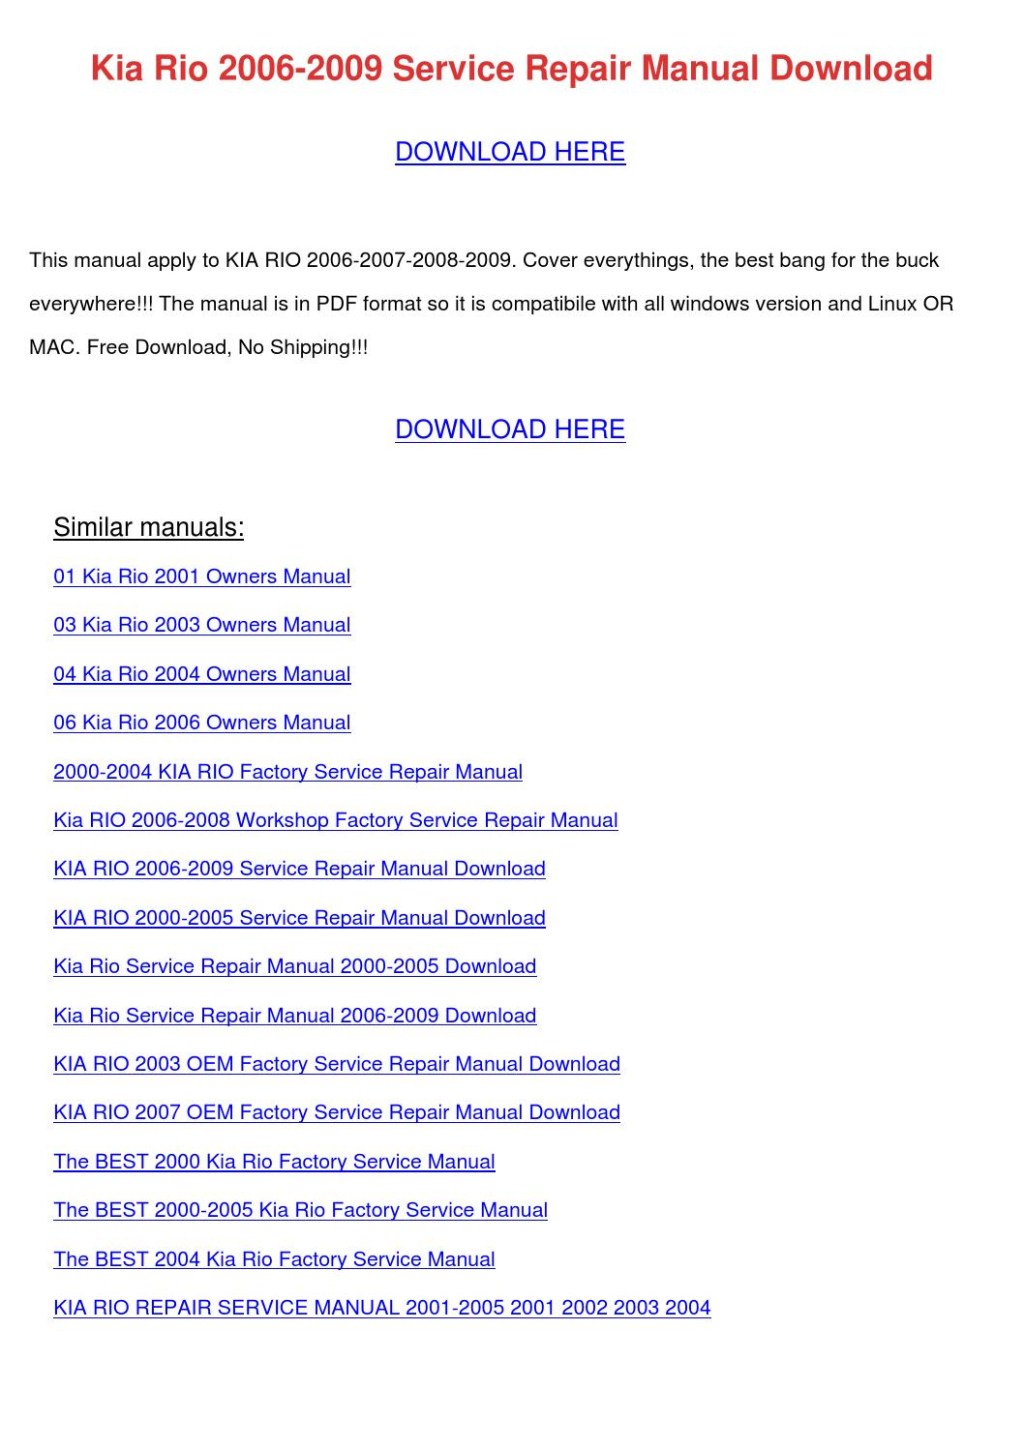 Picture of: Kia Rio   Service Repair Manual Downl by MaryMcclung – Issuu